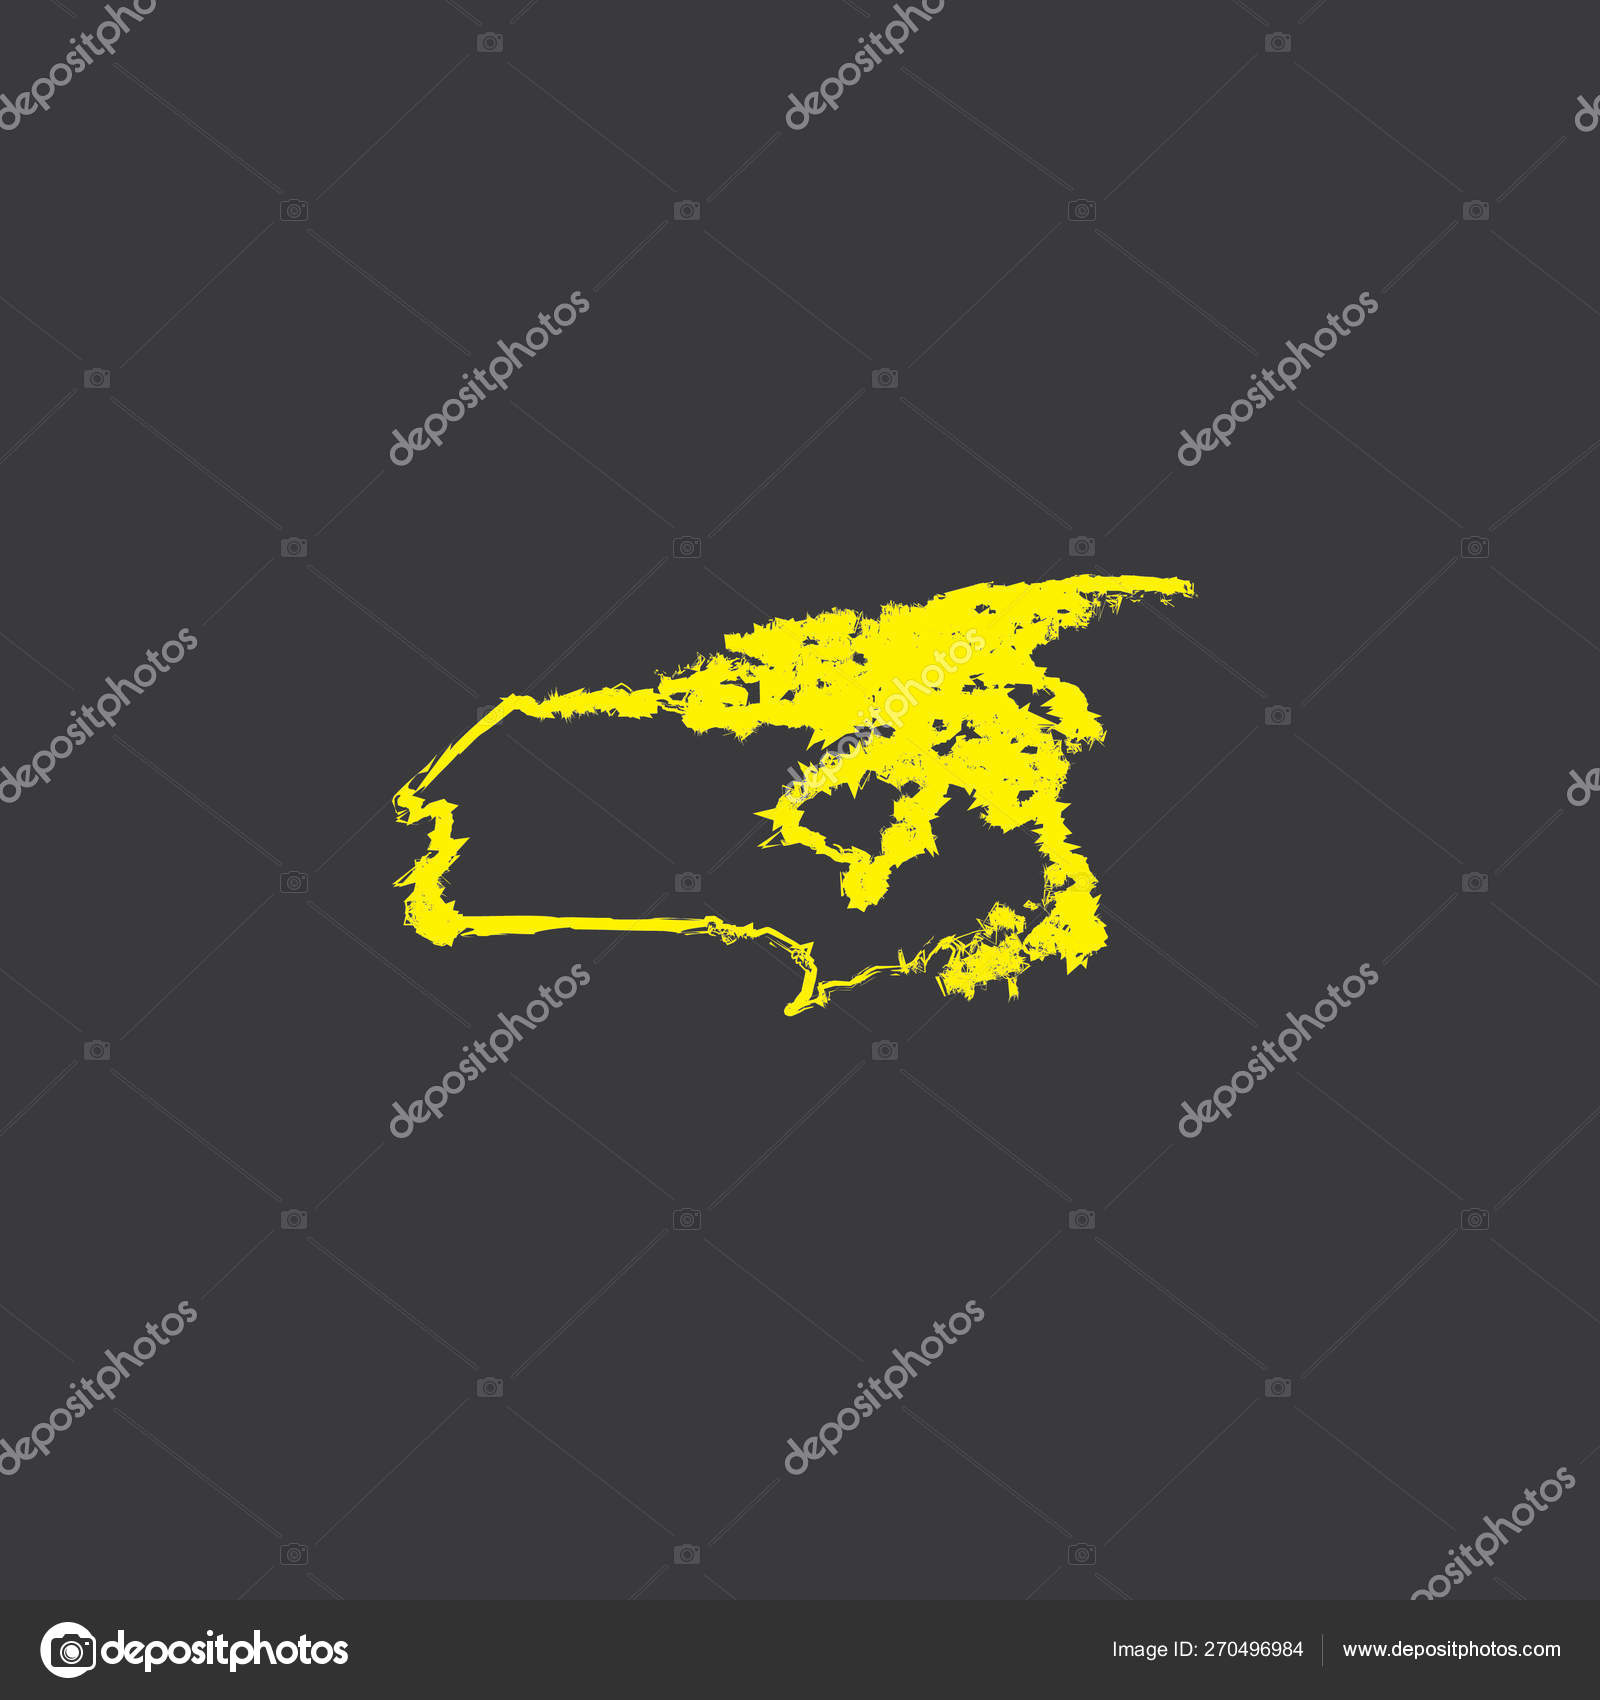 Finland Country Shape Illustration Black Background Stock Vector Image ...